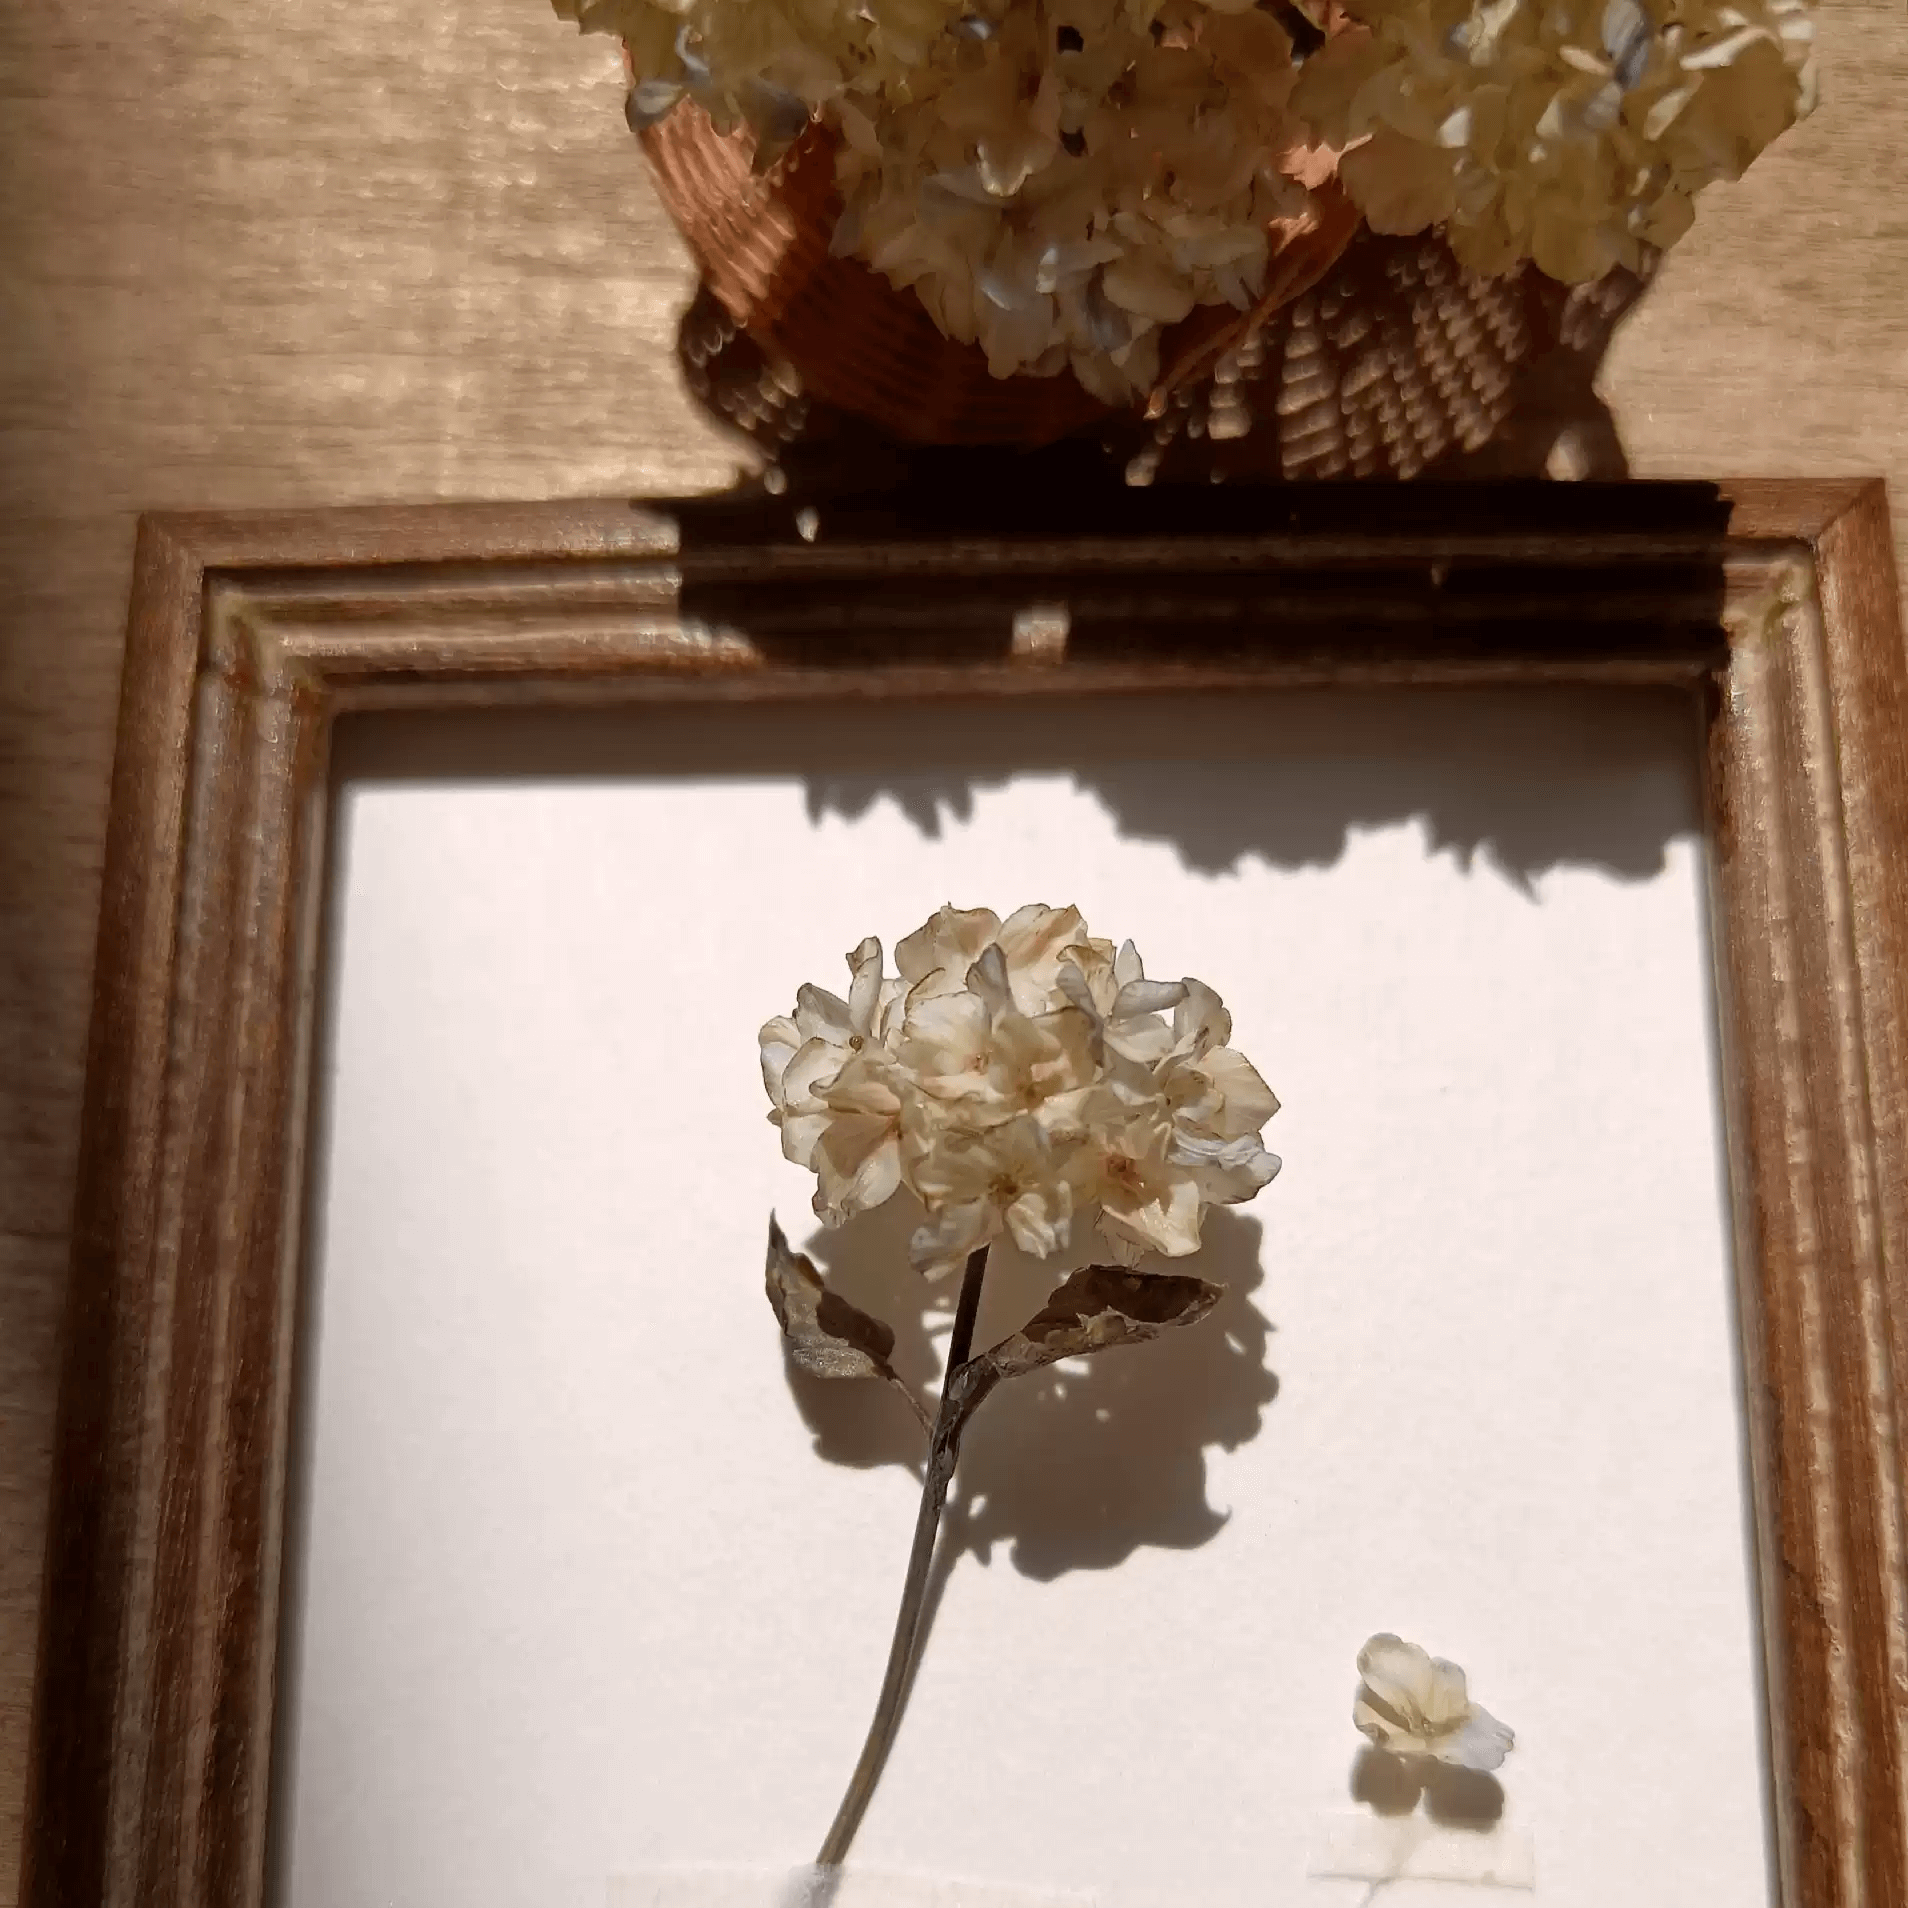 Hydrangeas are deciduous shrubs with flowers in terminal, round or umbrella-shaped clusters in colors of white, pink, or blue, or even purple.  Scale: 1:6; 1:12  Material: Handmade from Clay  Size: Standard; On picture frame.